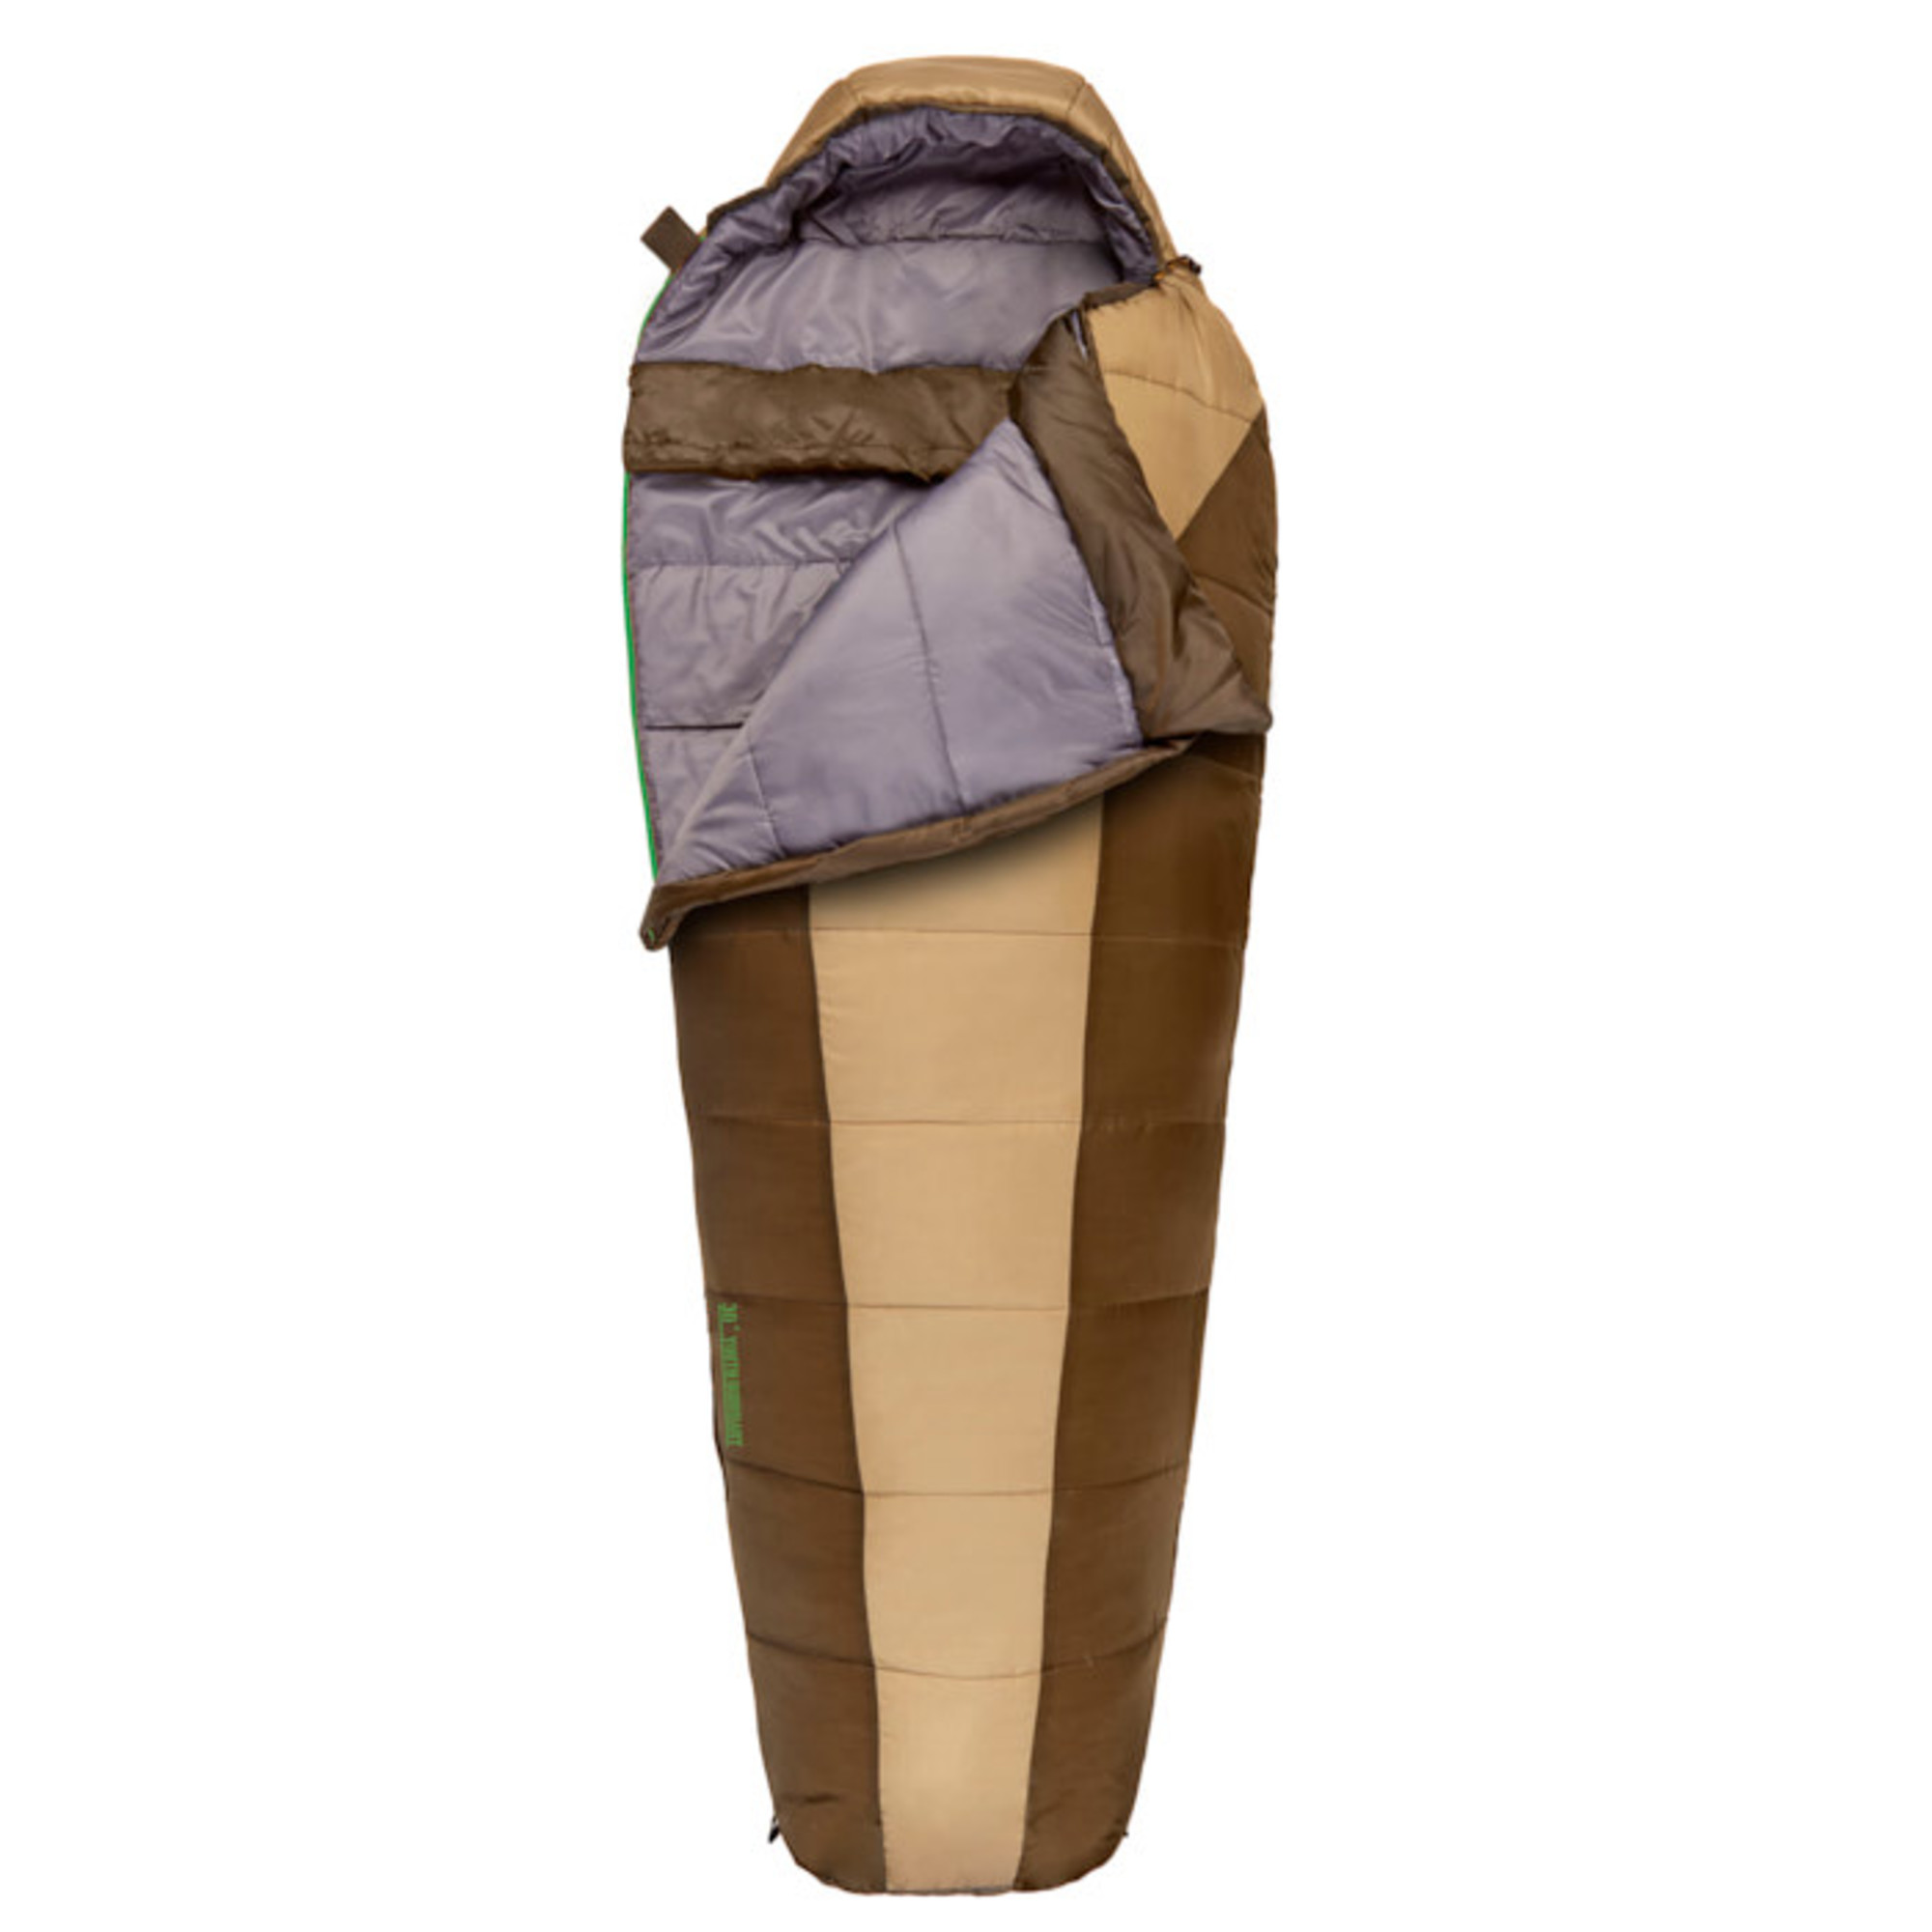 SJK Youth Boundary 30 sleeping bag, front view, partially unzipped